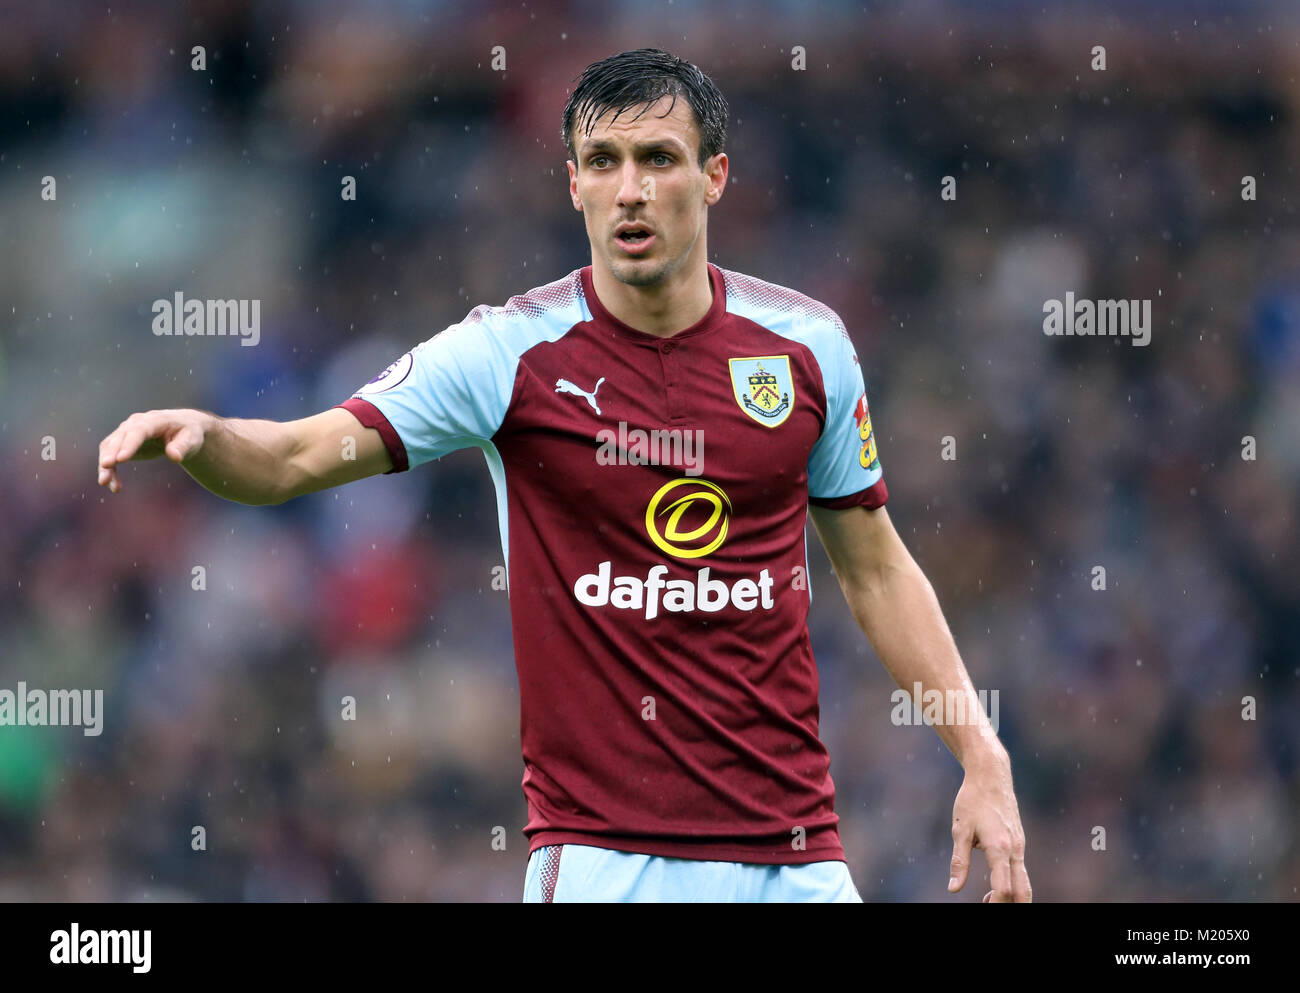 Burnley's Jack Cork during the Premier League match at Turf Moor, Burnley. PRESS ASSOCIATION Photo. Picture date: Saturday February 3, 2018. See PA story SOCCER Burnley. Photo credit should read: Richard Sellers/PA Wire. RESTRICTIONS: EDITORIAL USE ONLY No use with unauthorised audio, video, data, fixture lists, club/league logos or 'live' services. Online in-match use limited to 75 images, no video emulation. No use in betting, games or single club/league/player publications. Stock Photo